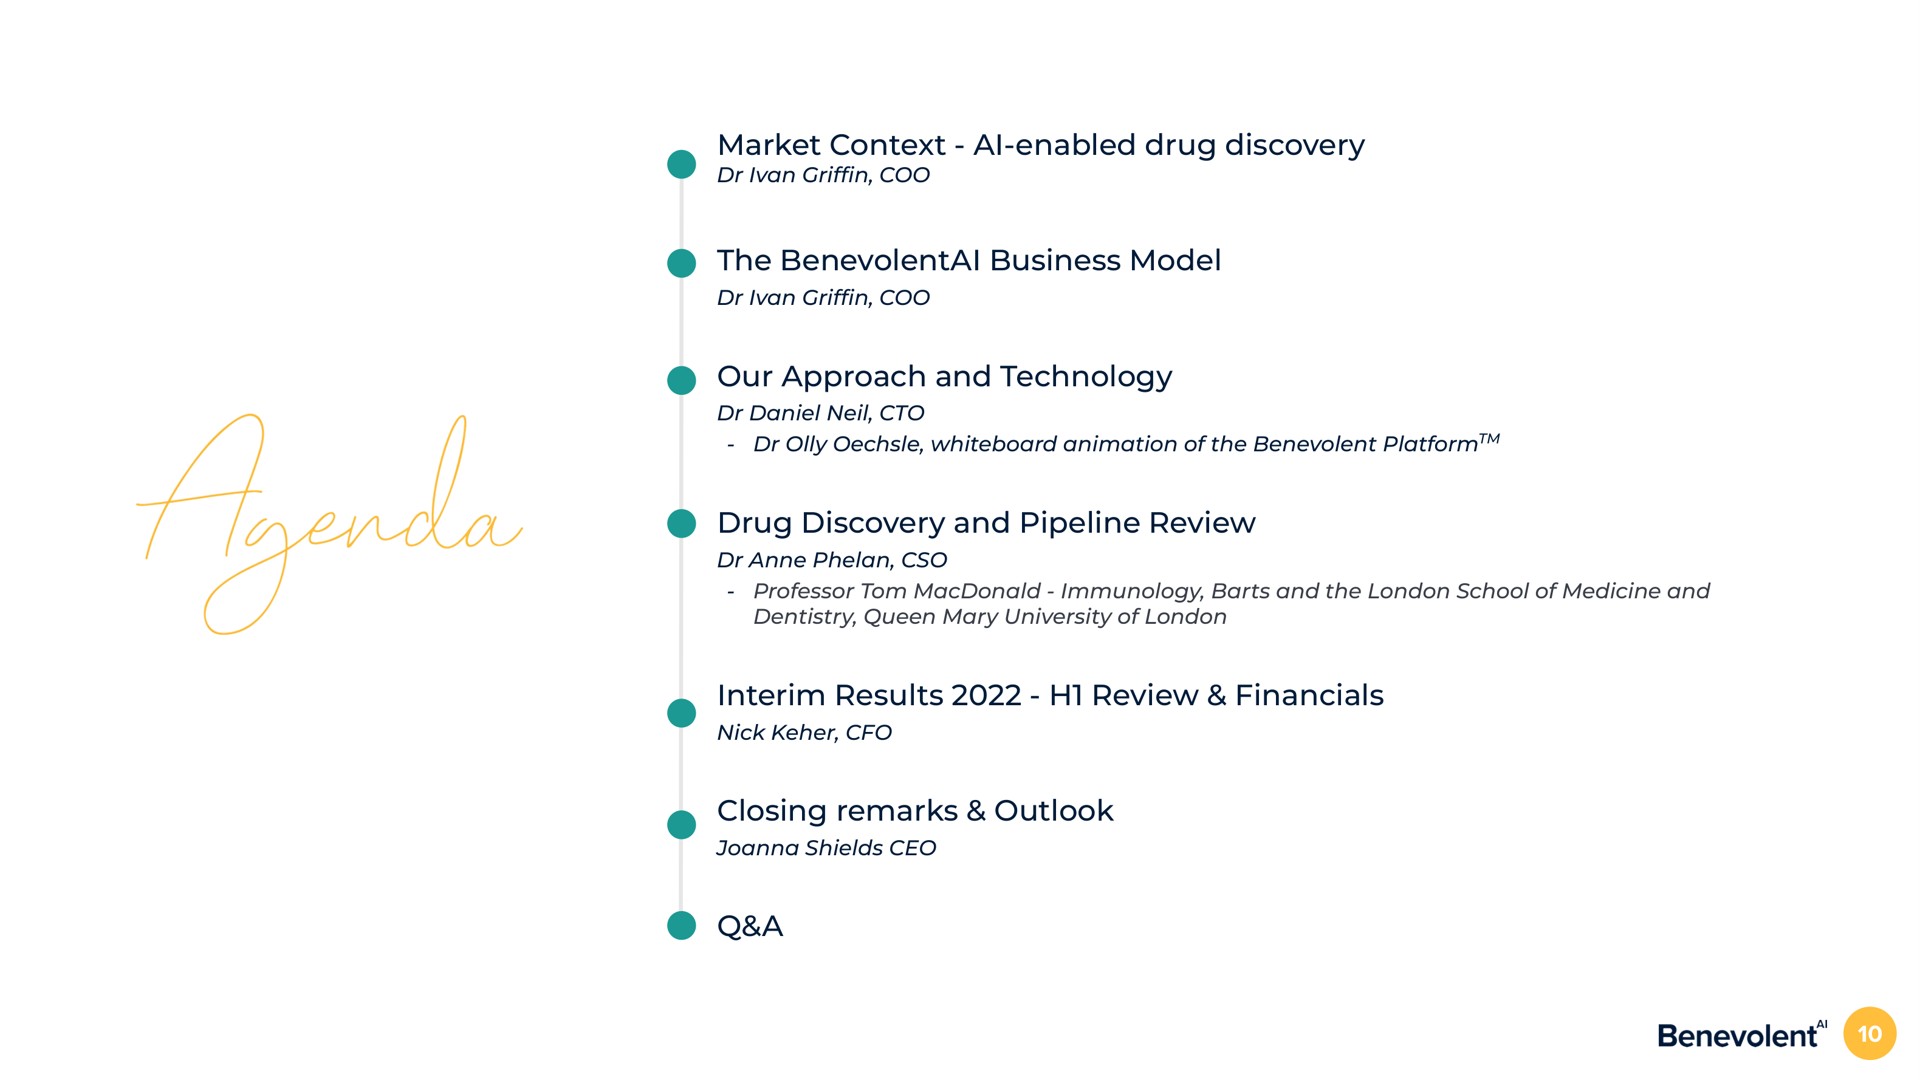 market context enabled drug discovery the business model our approach and technology drug discovery and pipeline review interim results review closing remarks outlook a | BenevolentAI